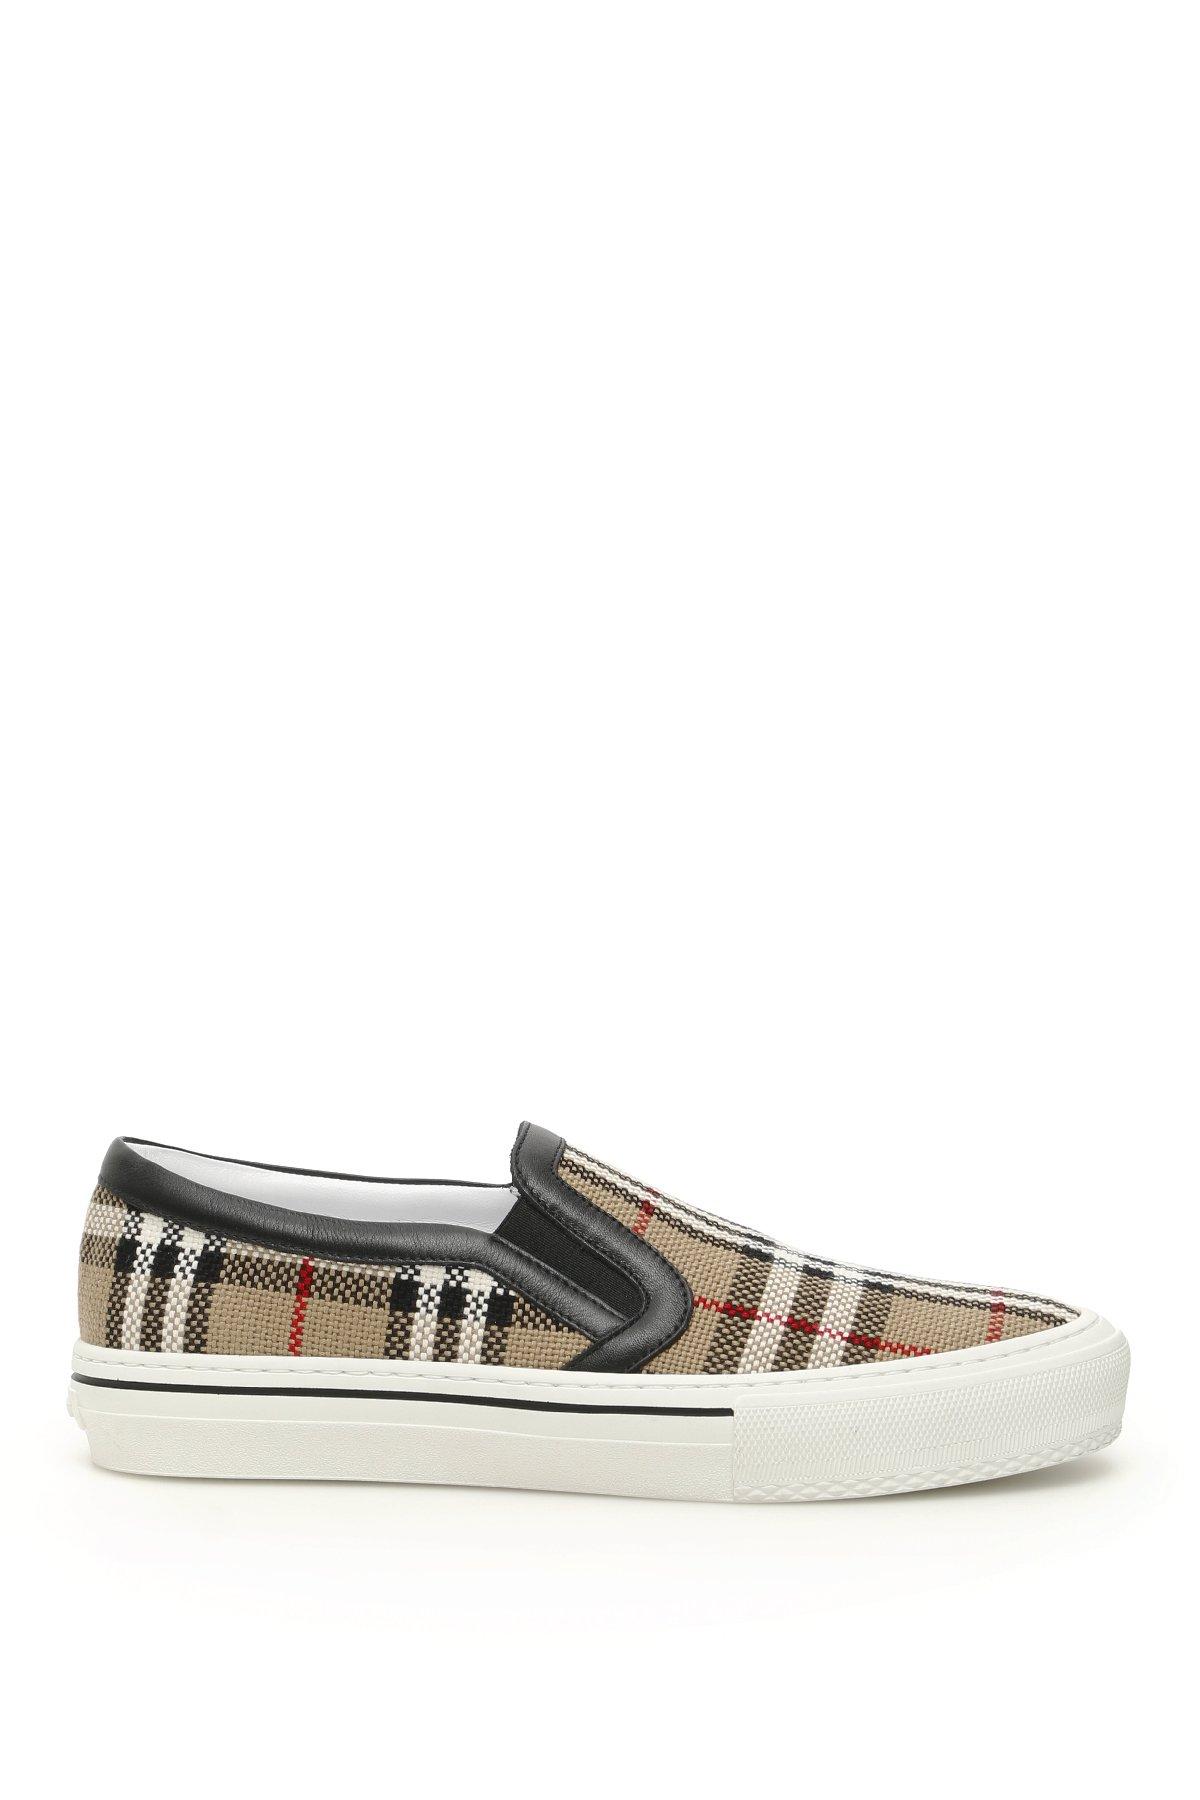 Burberry Vintage Check And Leather Slip 